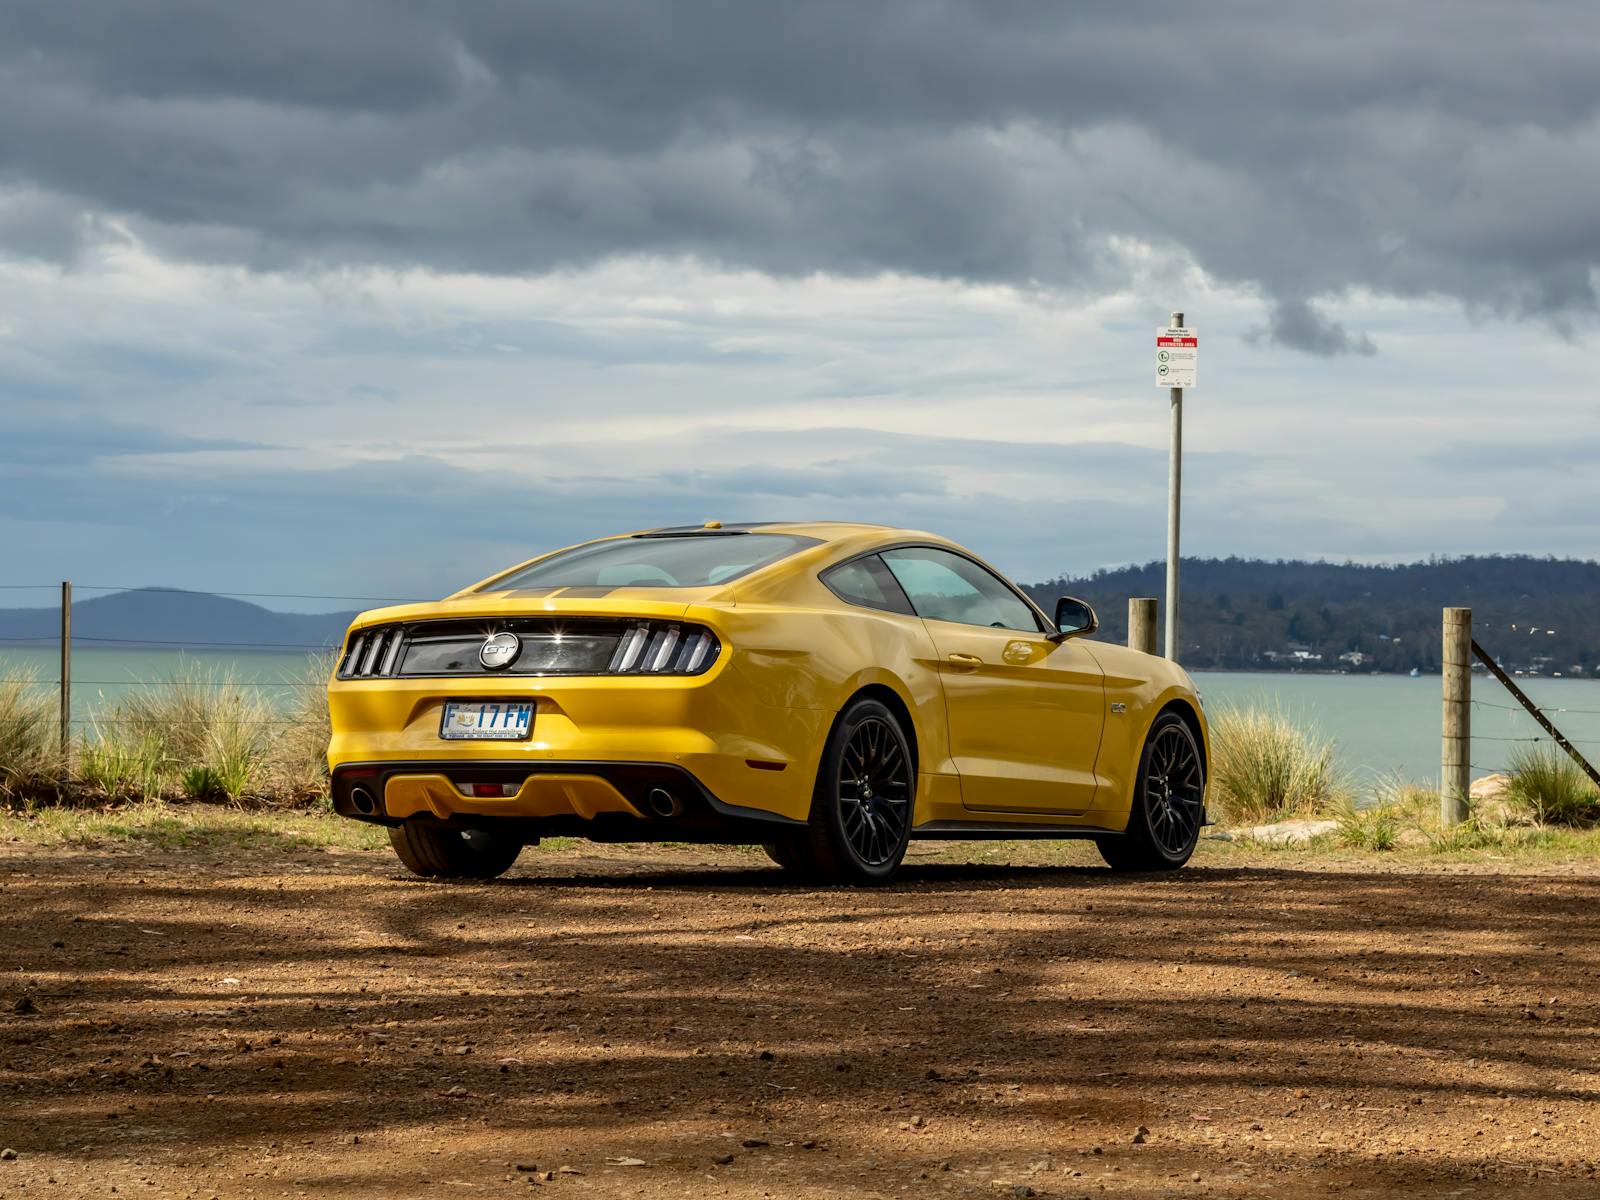 Mustang rental in Tasmania with Overdrive Car Hire